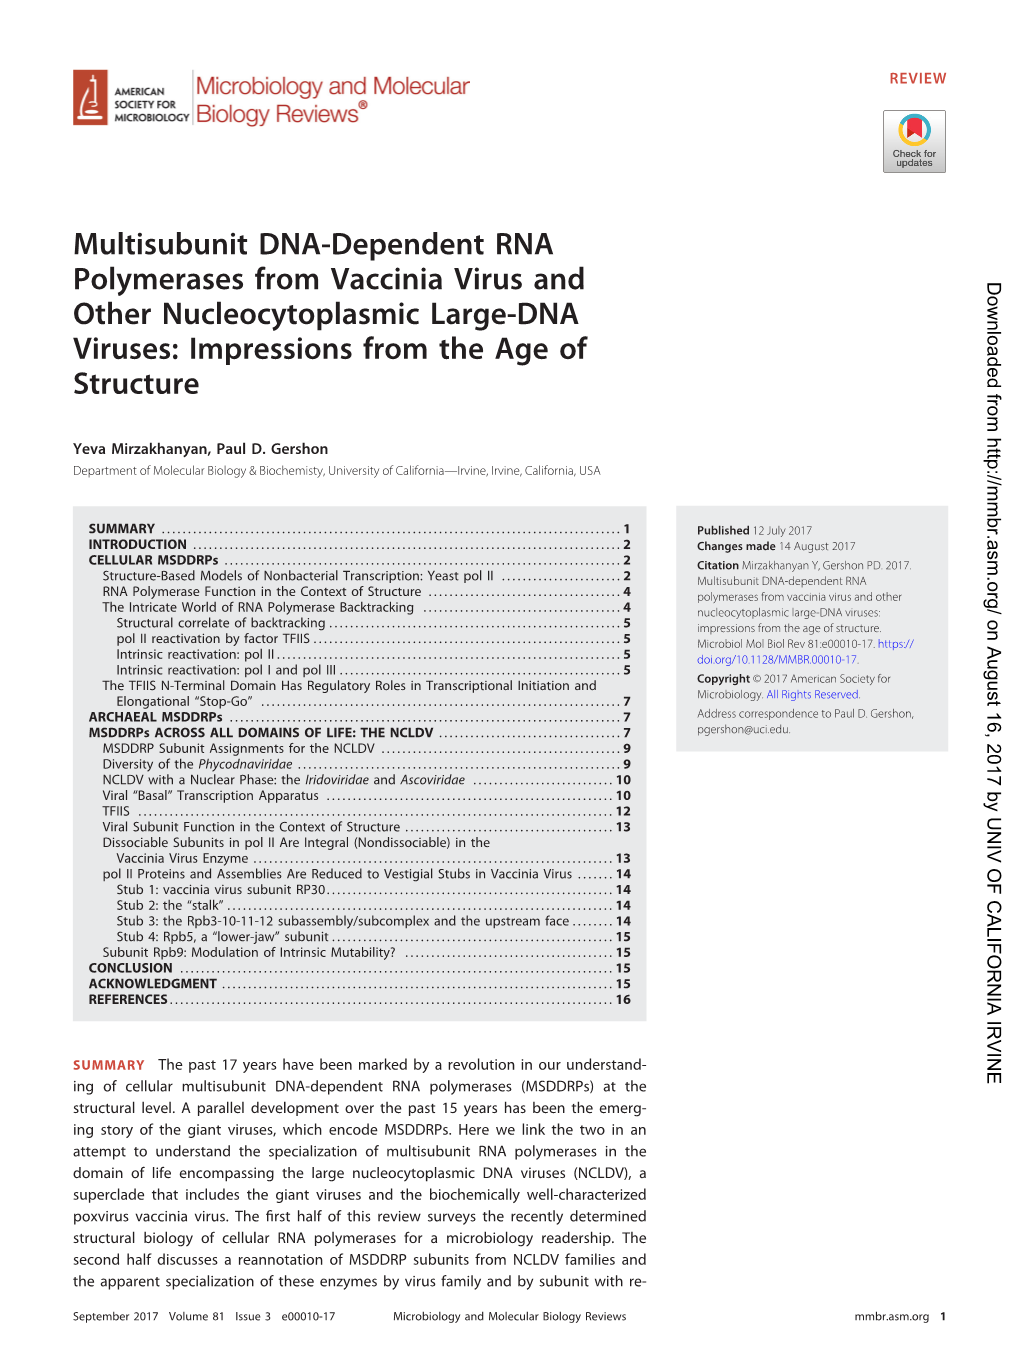 Multisubunit DNA-Dependent RNA Polymerases from Vaccinia Virus